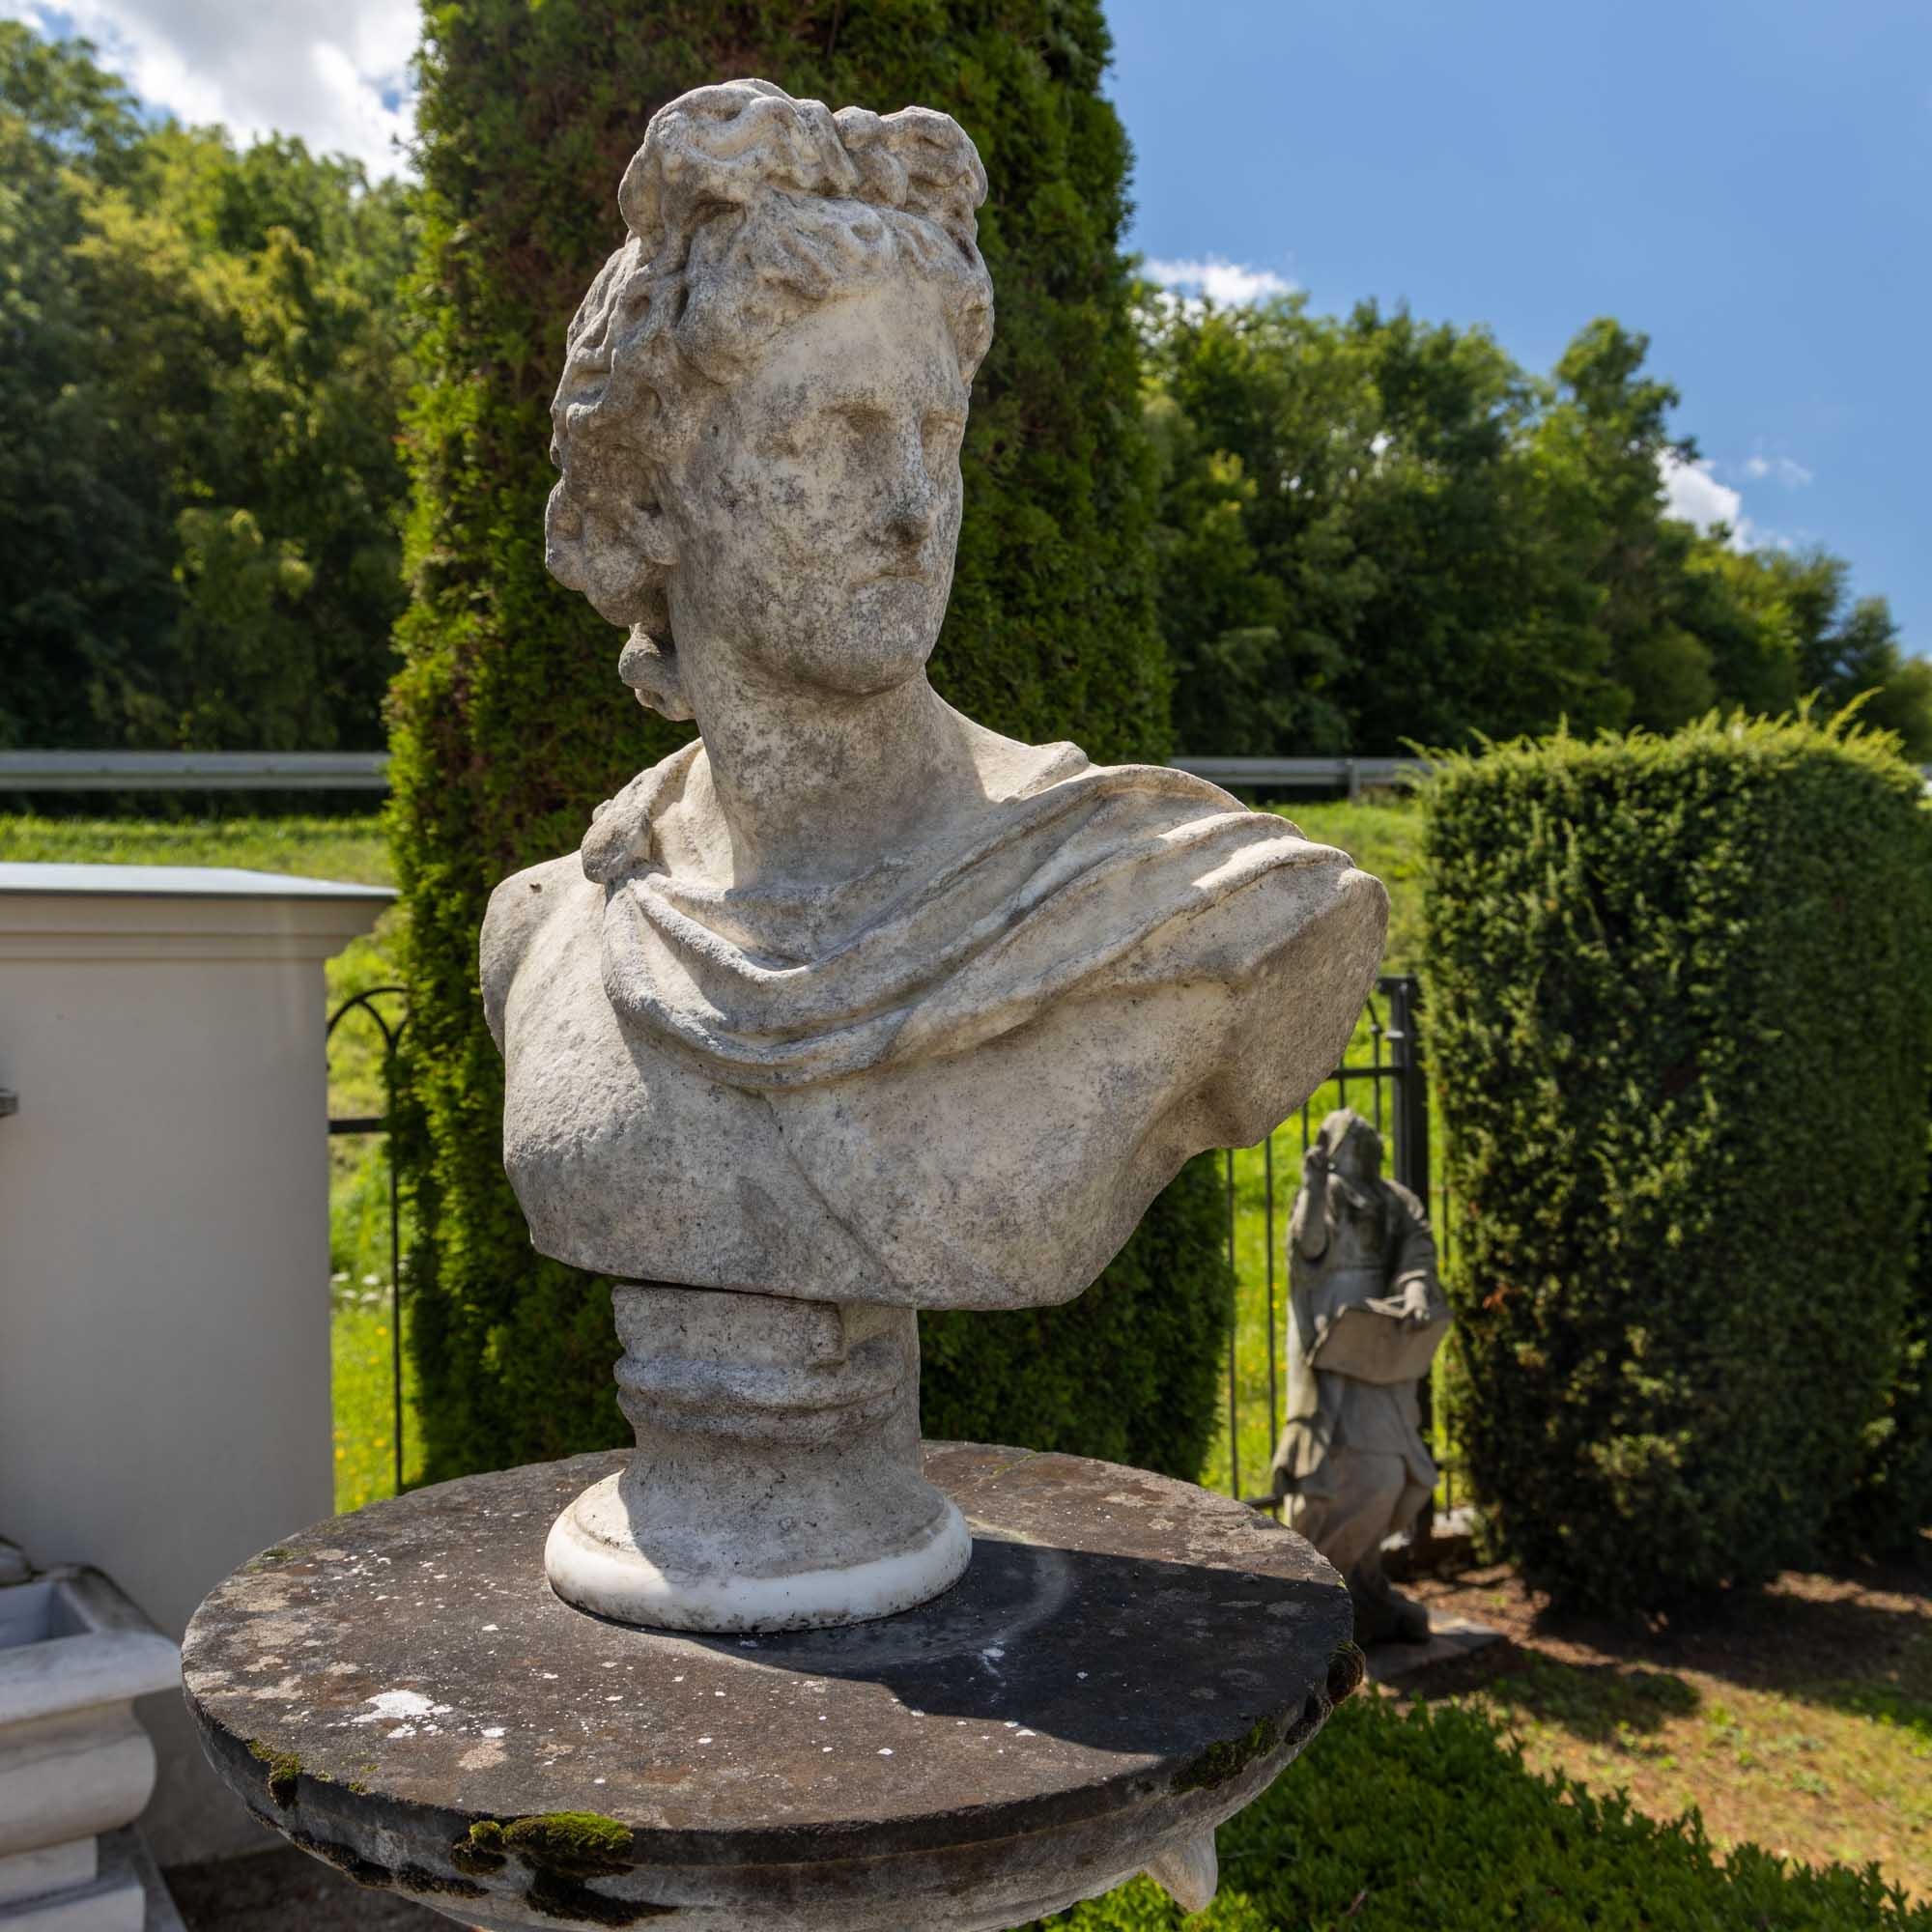 Bust of the famous Apollo of Belvedere, the original dating from the third century BC. Here a variant made of hand-cut granite with traces of weathering and a slightly softened authentic character.